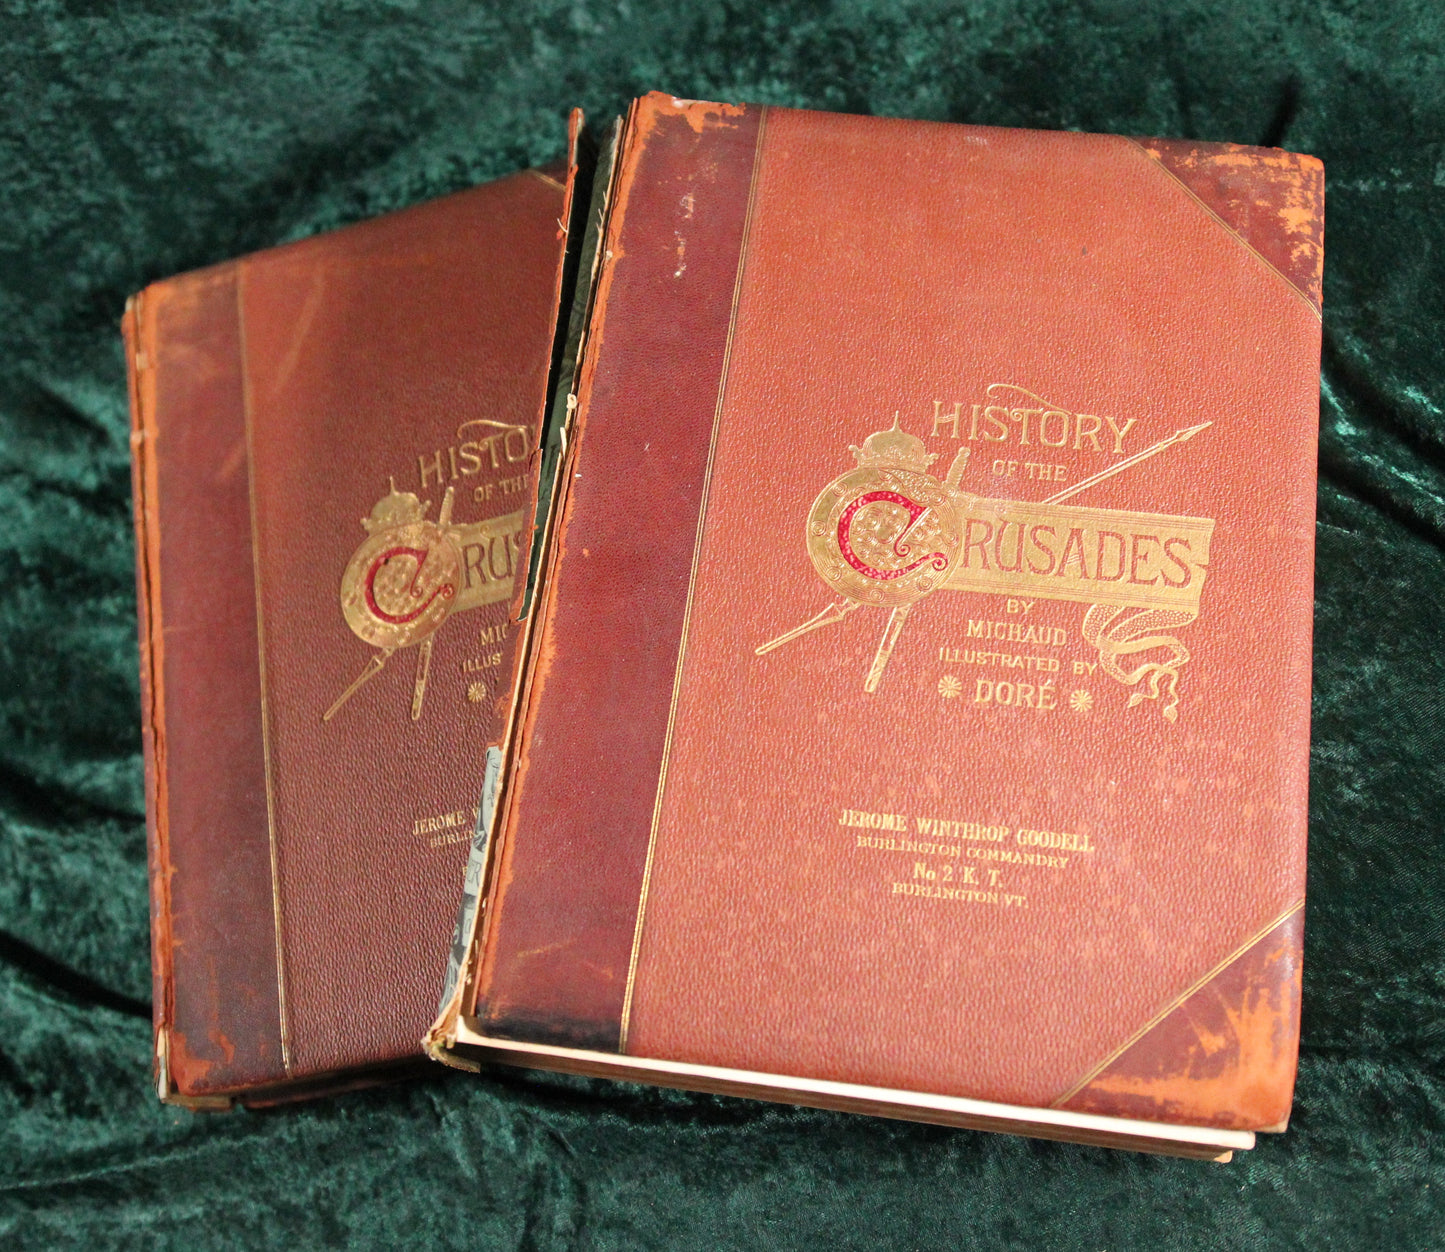 History of the Crusades by Michaud, Illustrated by Gustave Doré, 2 Volume Set, c. 1880